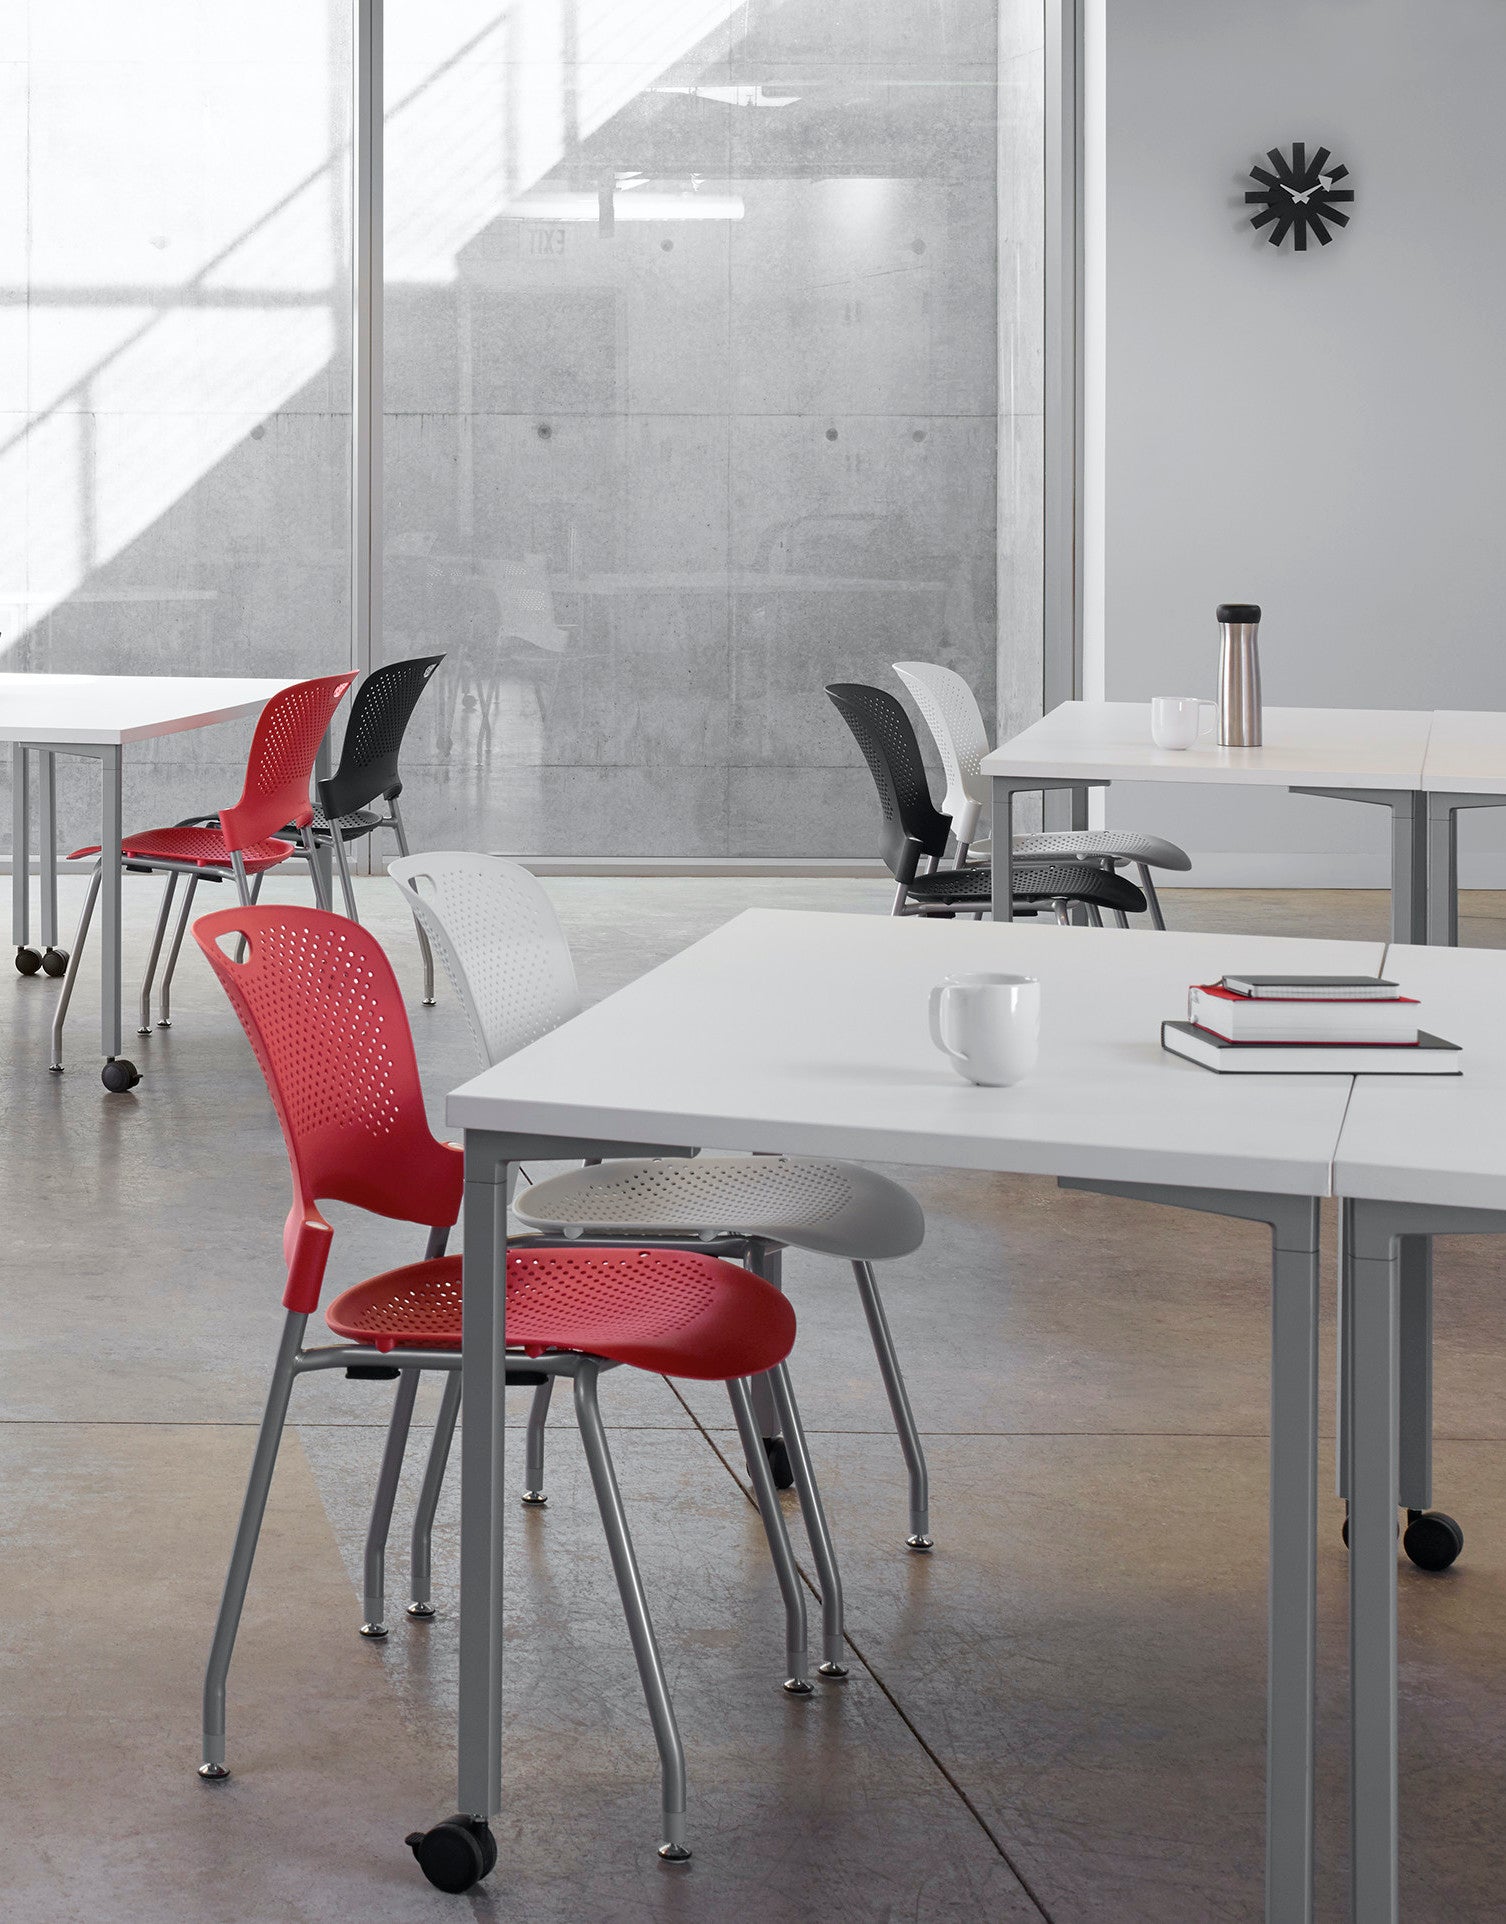 Herman Miller Caper Stacking Chair